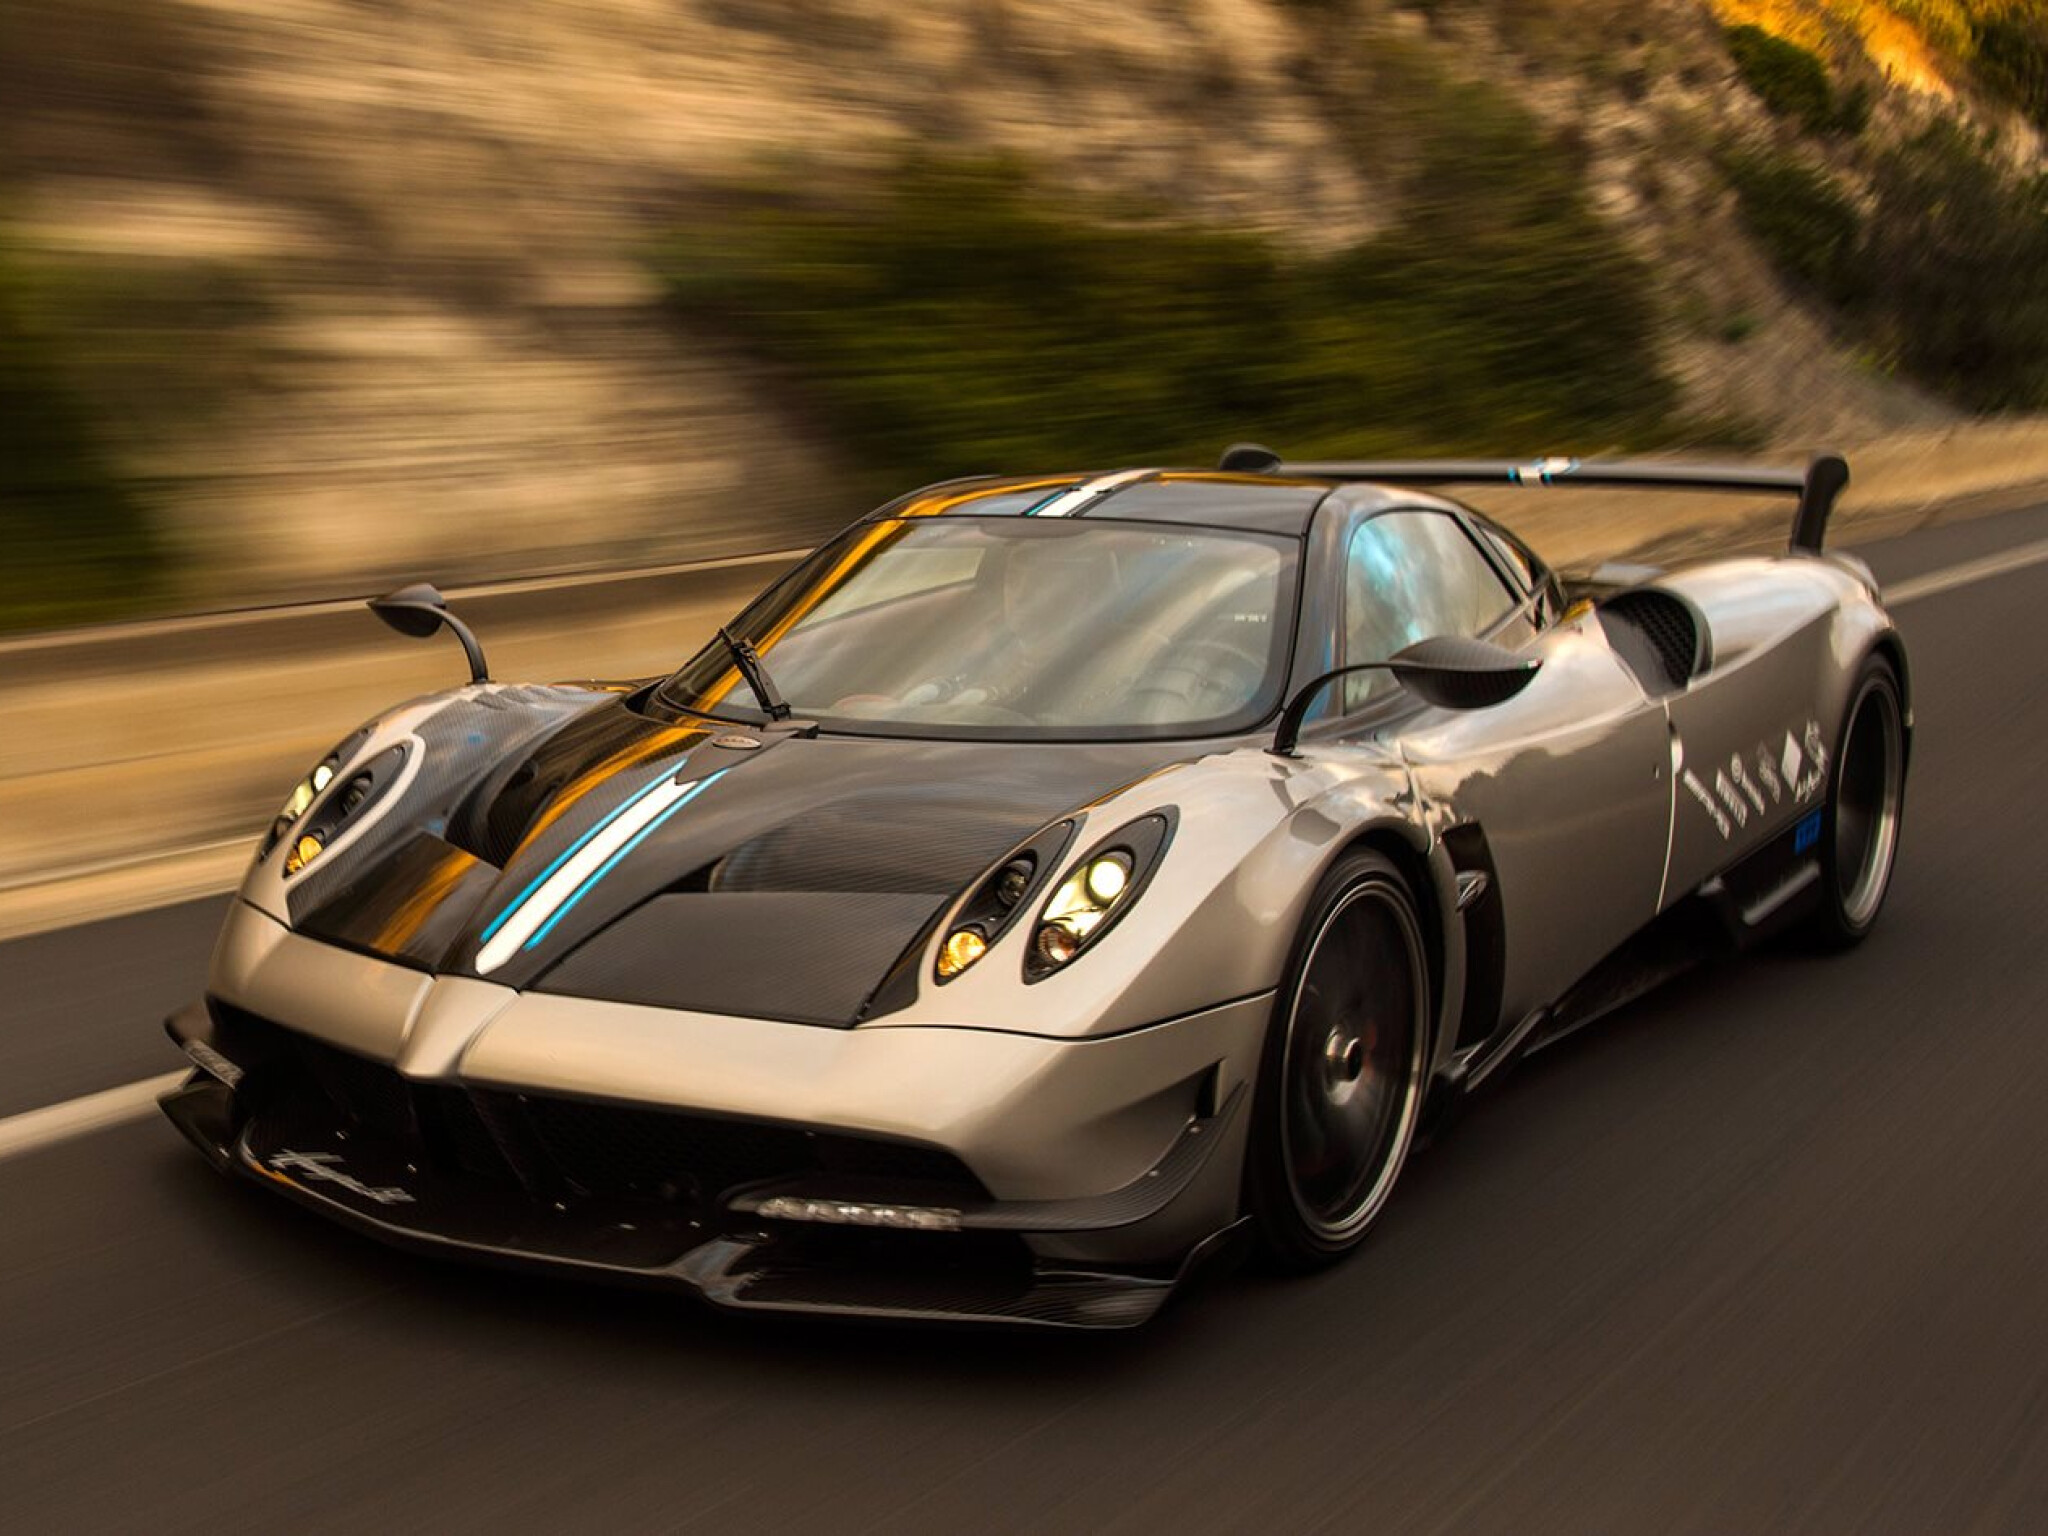 https://assets.whichcar.com.au/image/upload/s--8Lm5yaaG--/c_fill,f_auto,q_auto:good/t_p_4x3/v1/archive/motor/2016/05/26/65743/Pagani-Huayra-BC-review-main.jpg